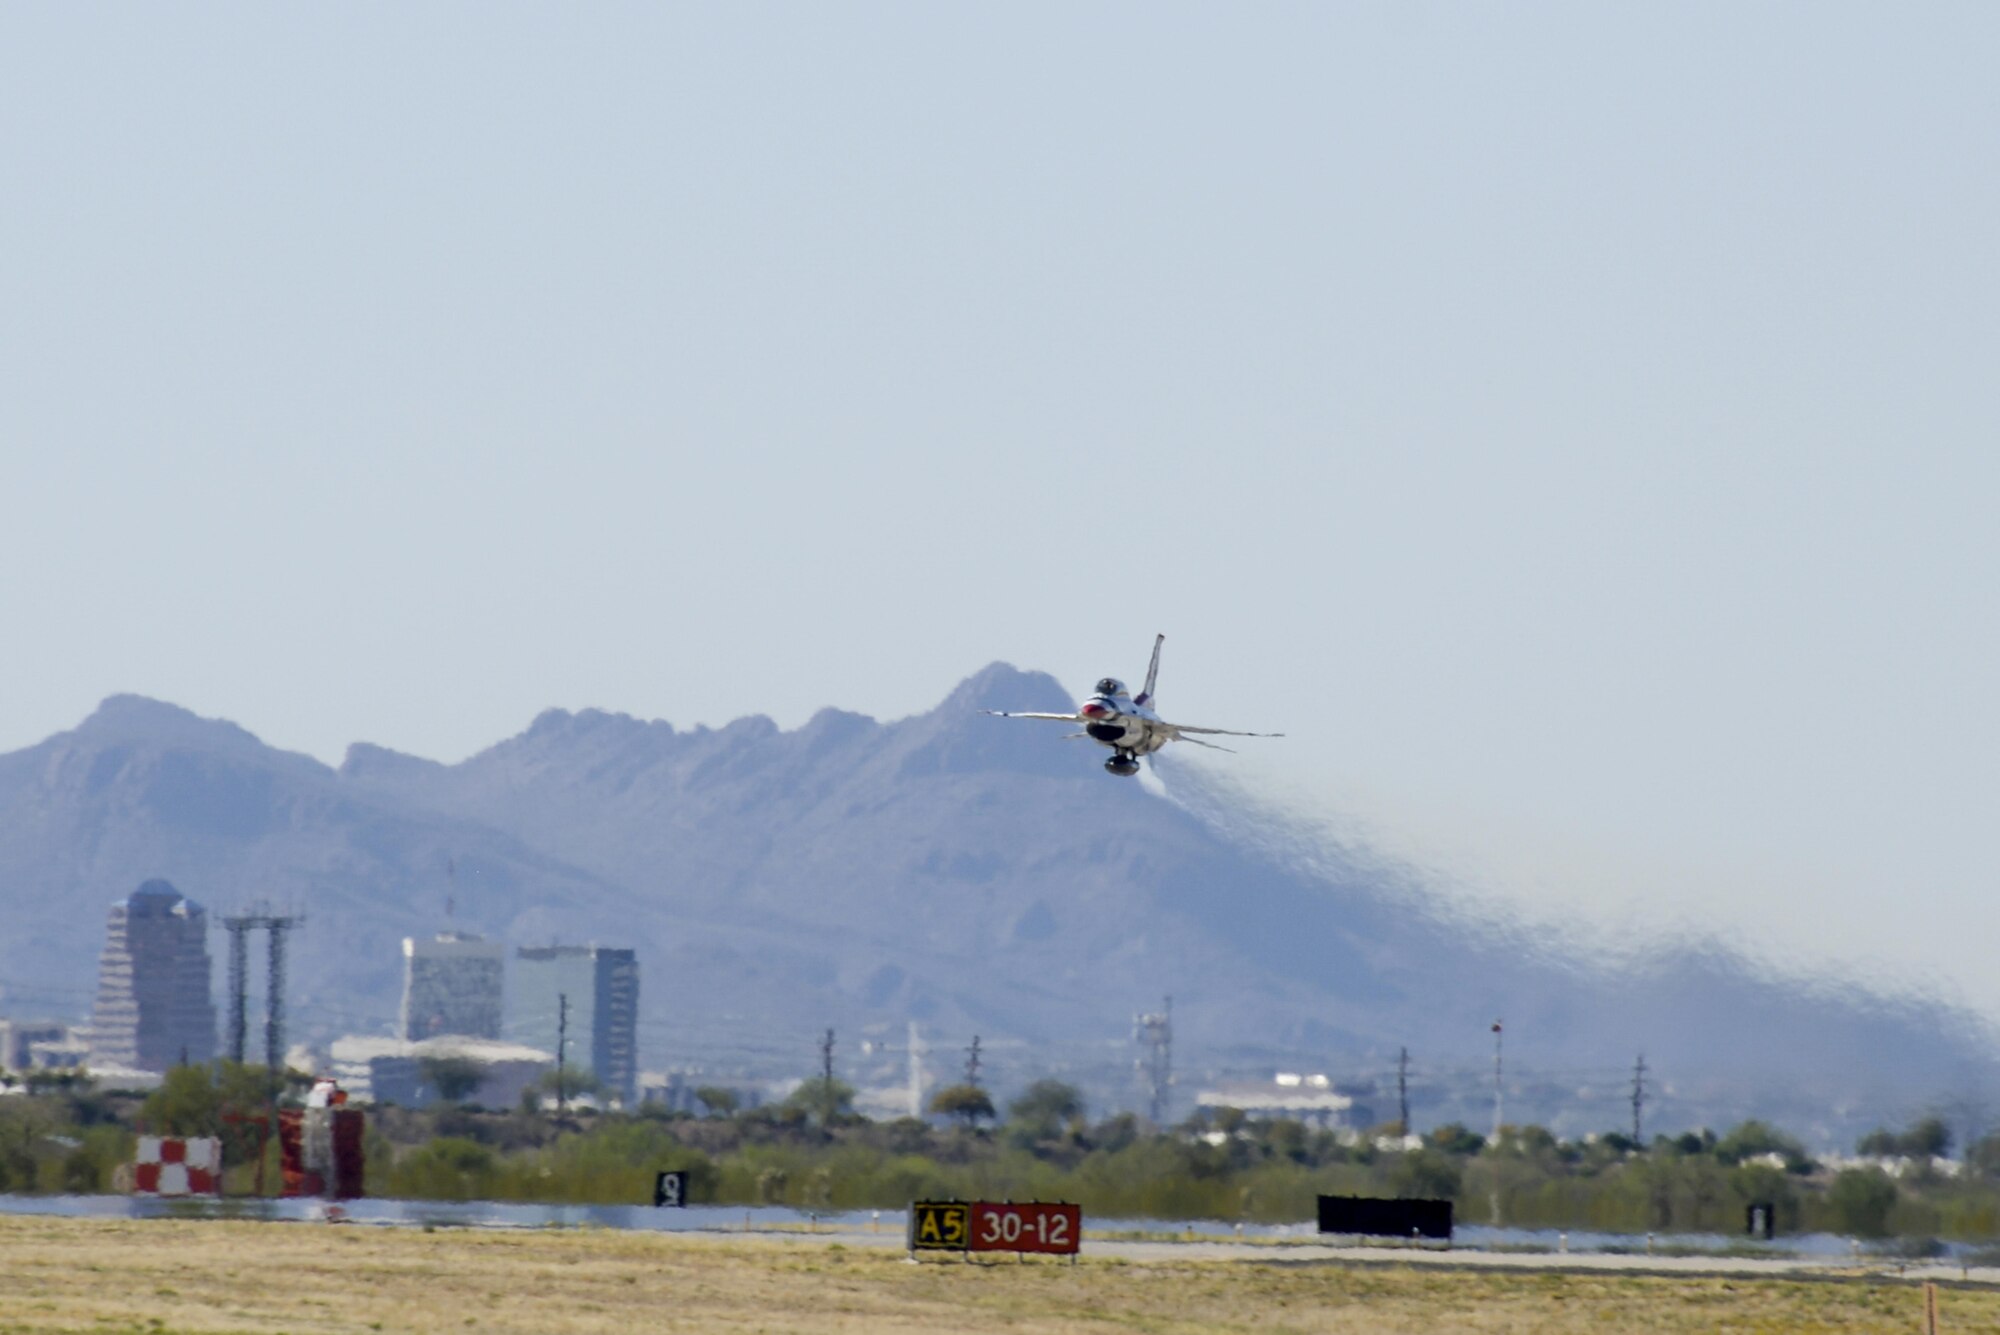 U.S. Air Force Maj. Kevin Walsh, U.S. Air Force Air Demonstration Squadron pilot and operations officer, launches Thunderbird 7, an F-16 Fighting Falcon, with Brendon Lyons, Tucson community hometown hero, in the rear seat at Davis-Monthan Air Force Base, Ariz., March 11, 2016.  Lyons was nominated as a hometown hero because of his commitment to safety and his passion to make Tucson a safer community for cyclists and motorists.  (U.S. Air Force photo by Senior Airman Chris Massey/Released)